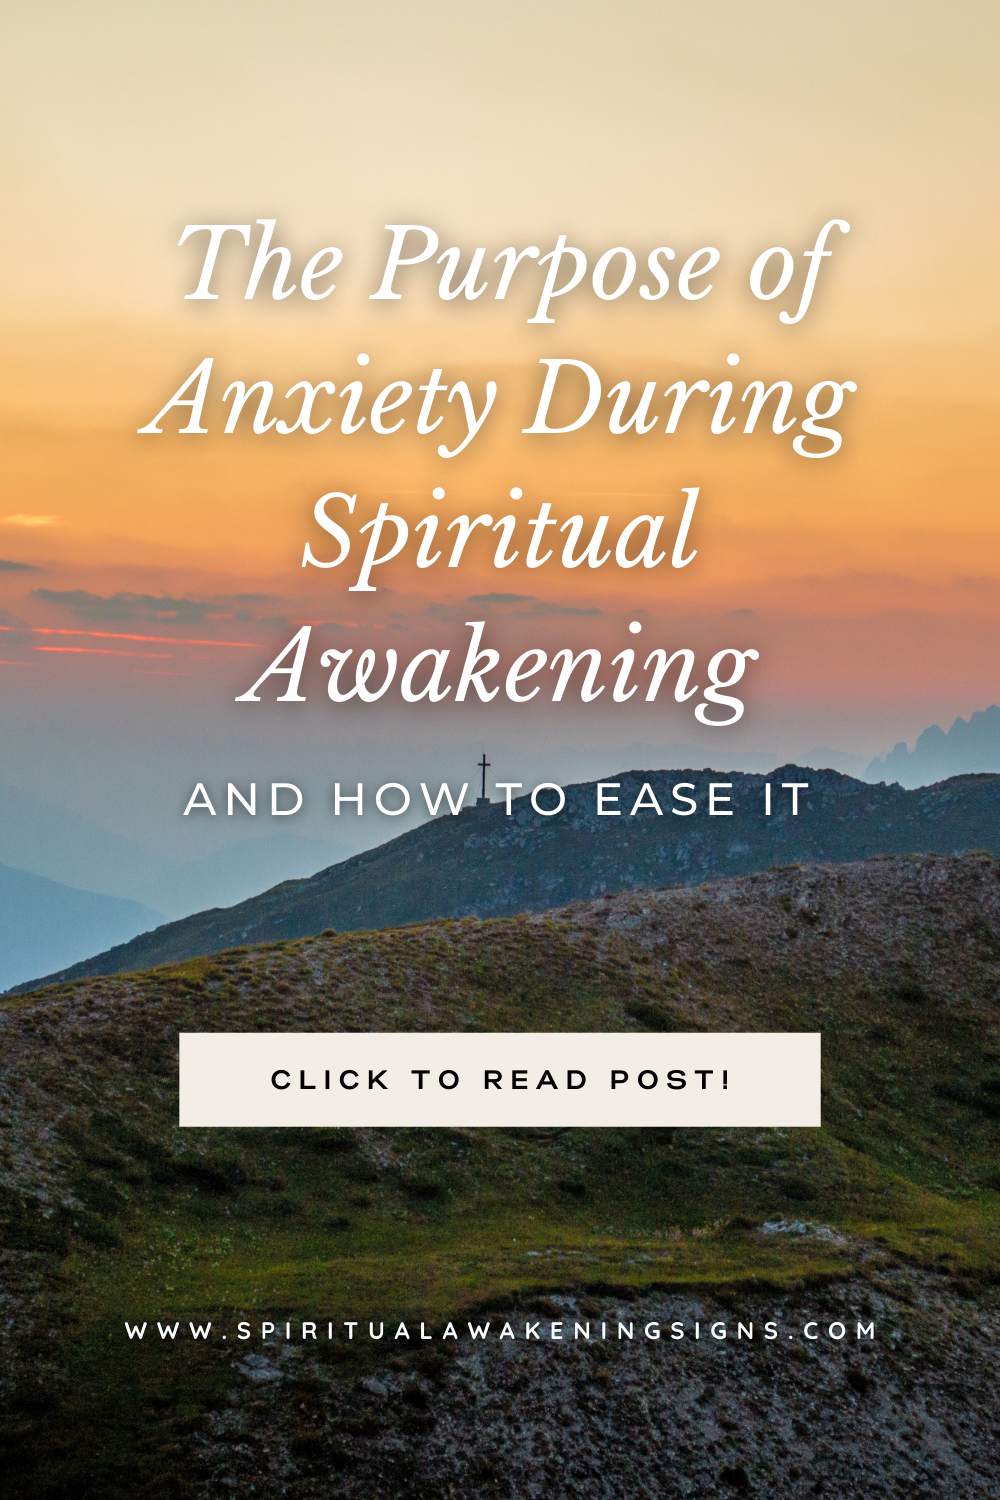 The Purpose of Anxiety During Spiritual Awakening (and how to ease it)